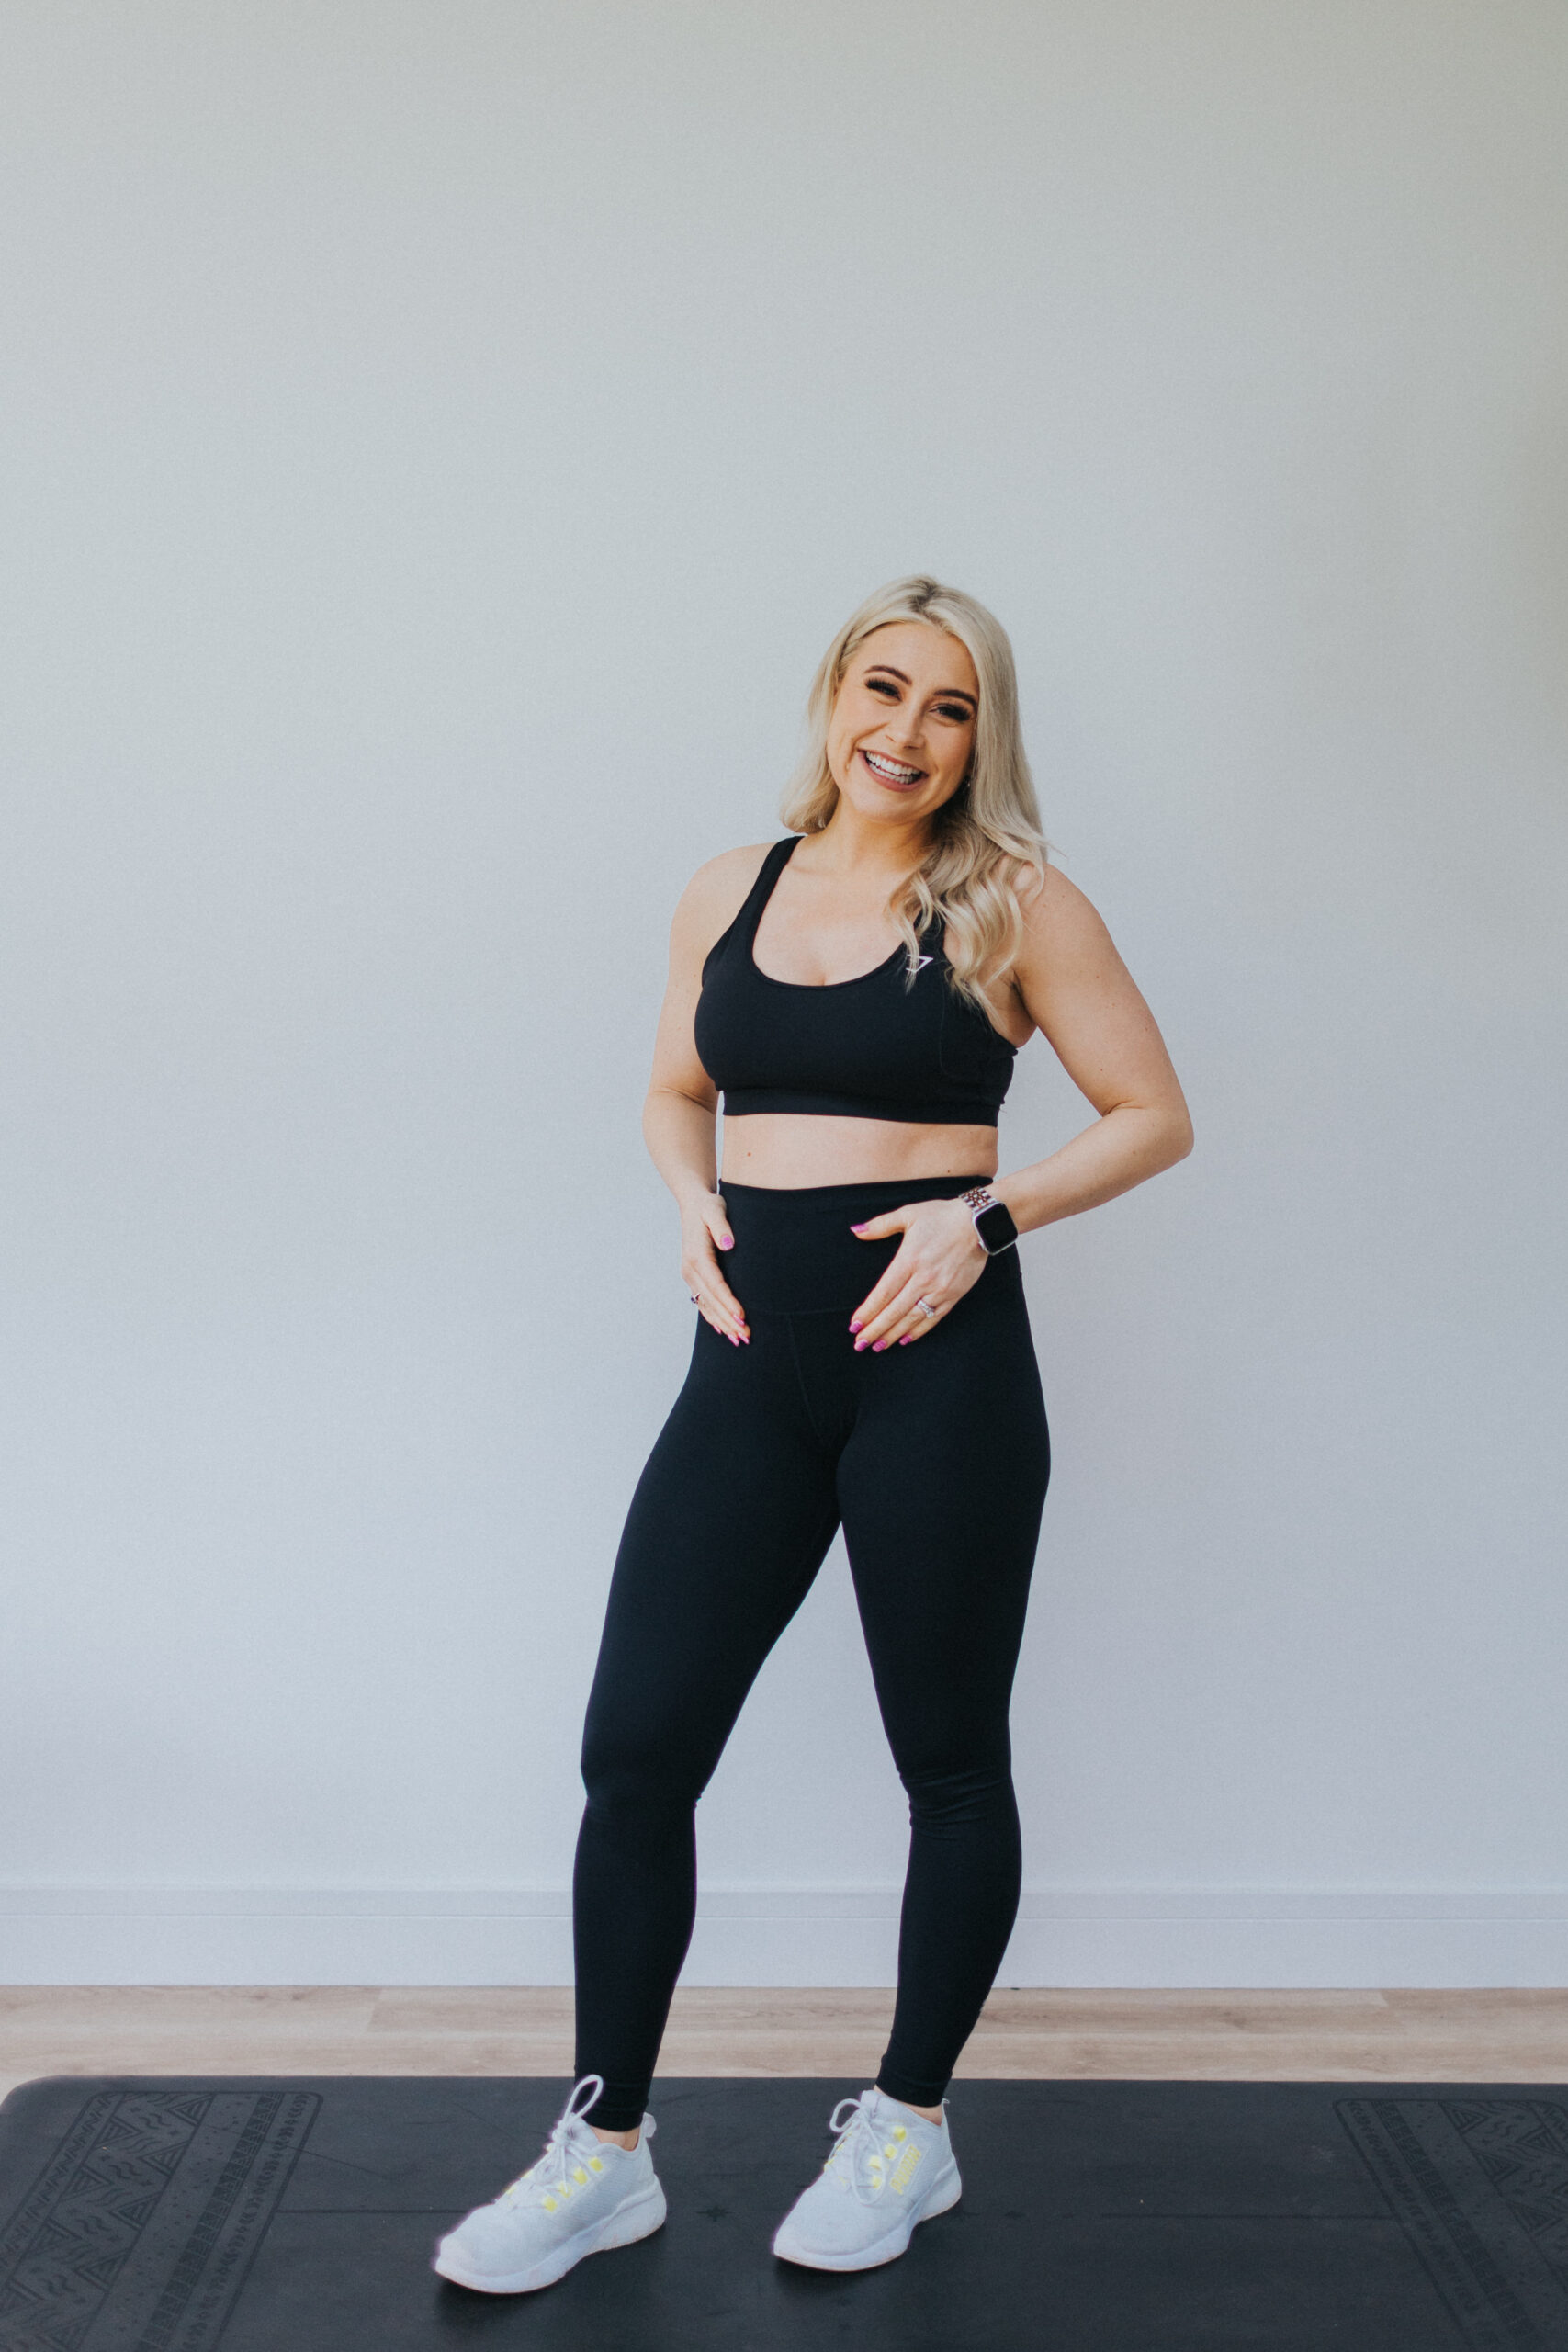 Fitness during pregnancy: CharlotteFit's story